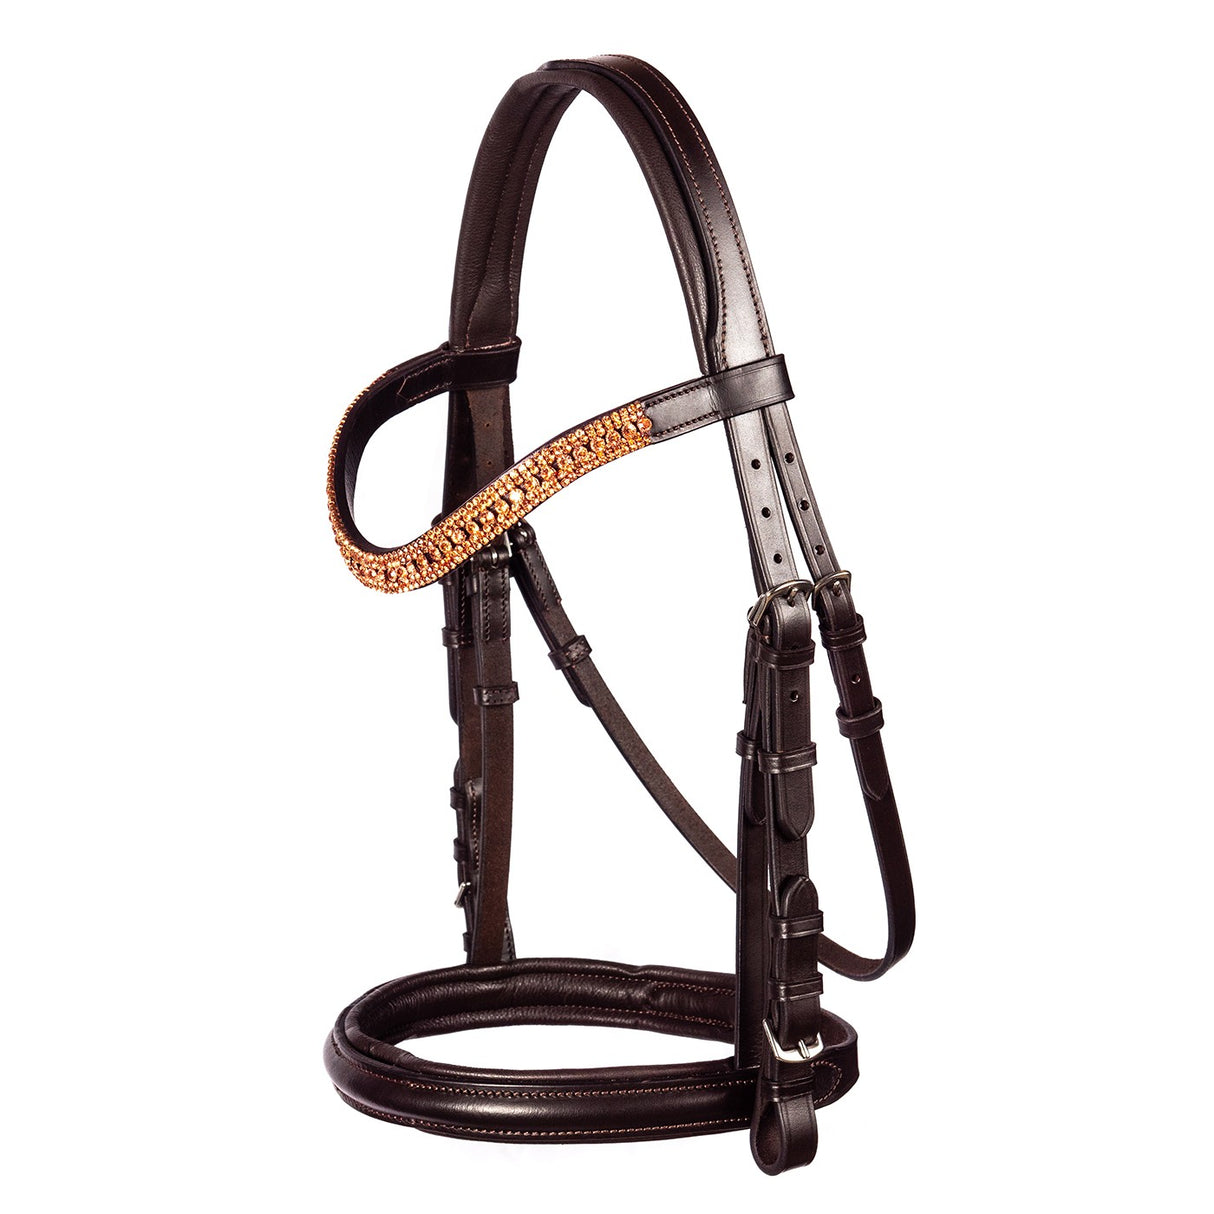 The New Pink Equine Comfort Luxe Metal Wave Diamante Bridle